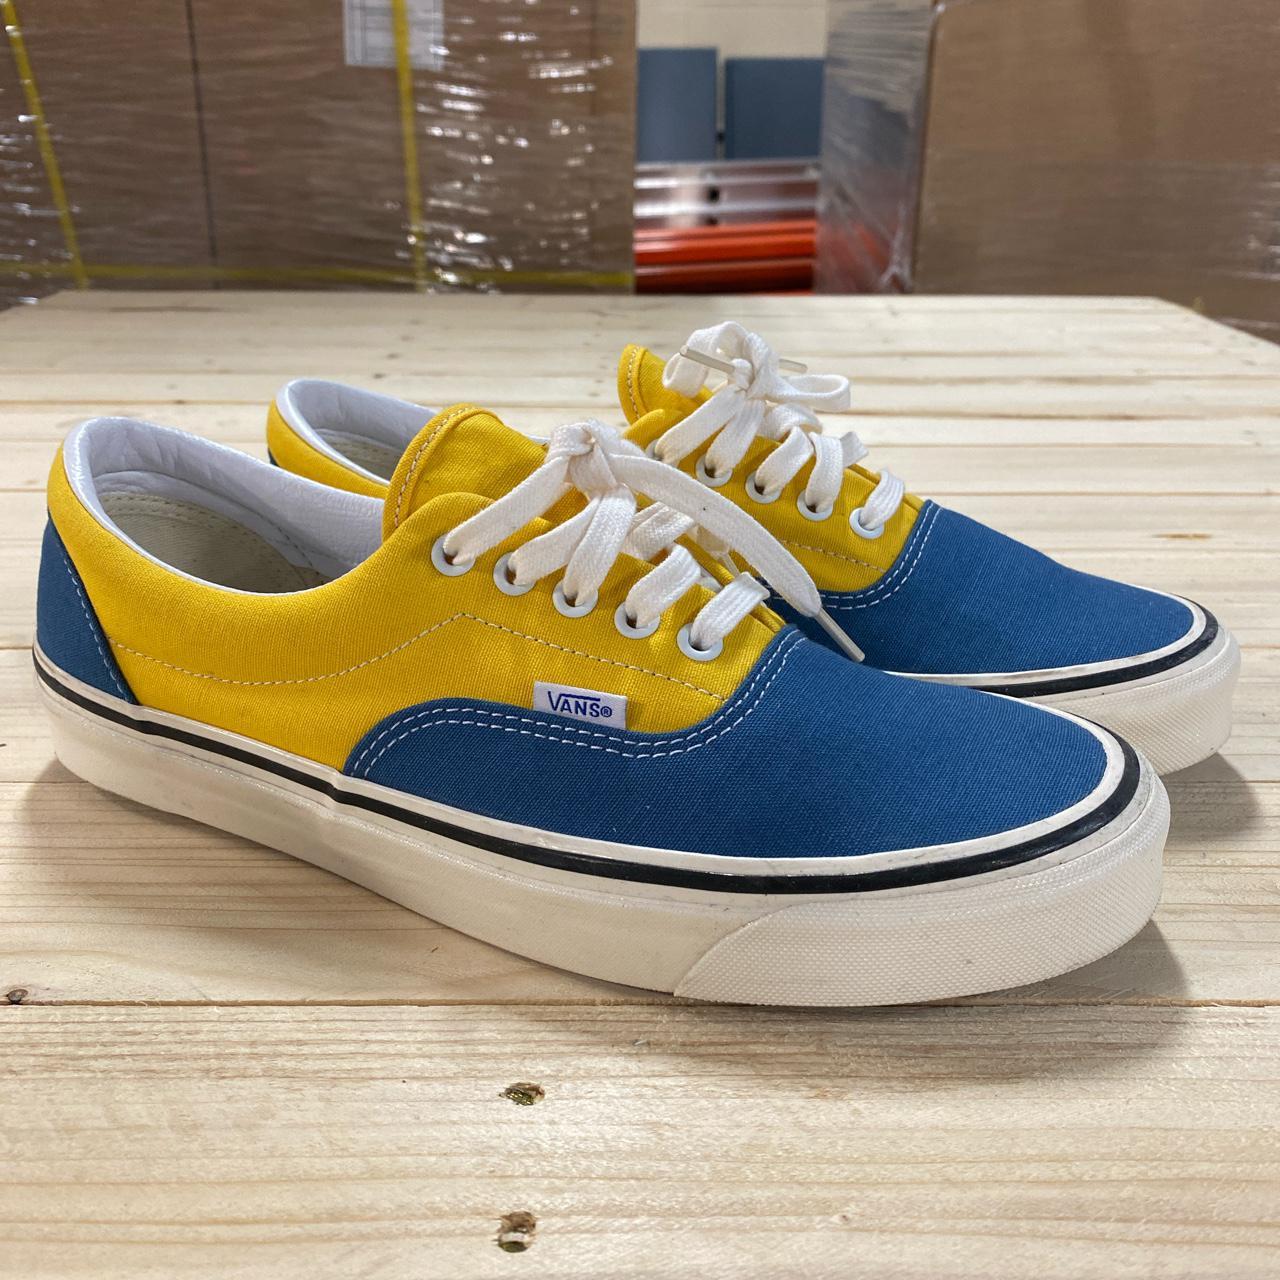 Vans Men's Blue and Yellow Trainers